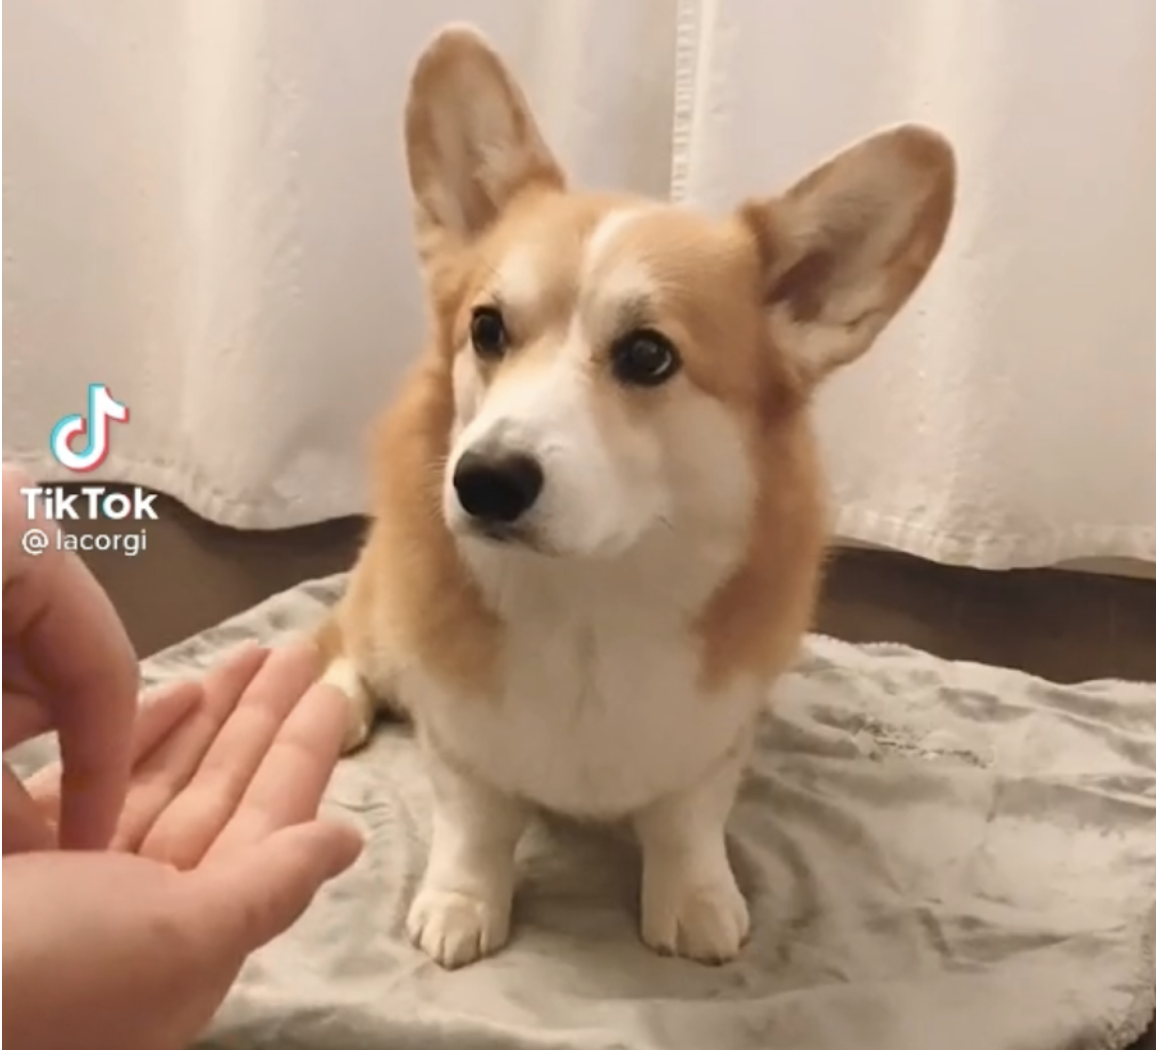 Top 5 Tik Tok challenges to try with your pets